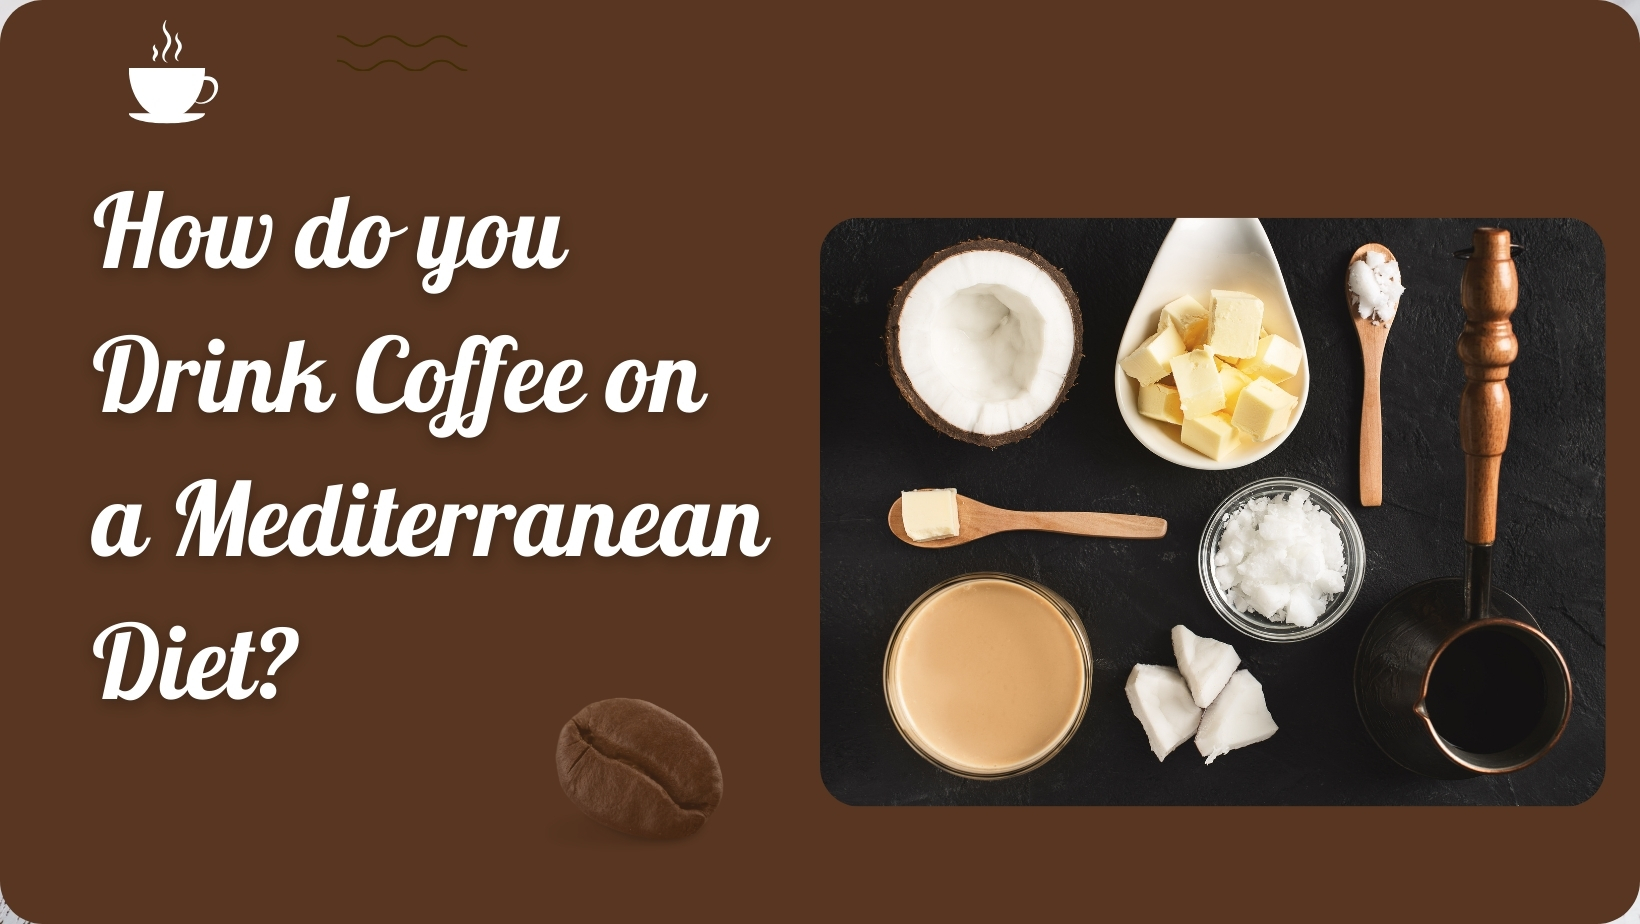 How do you Drink Coffee on a Mediterranean Diet?